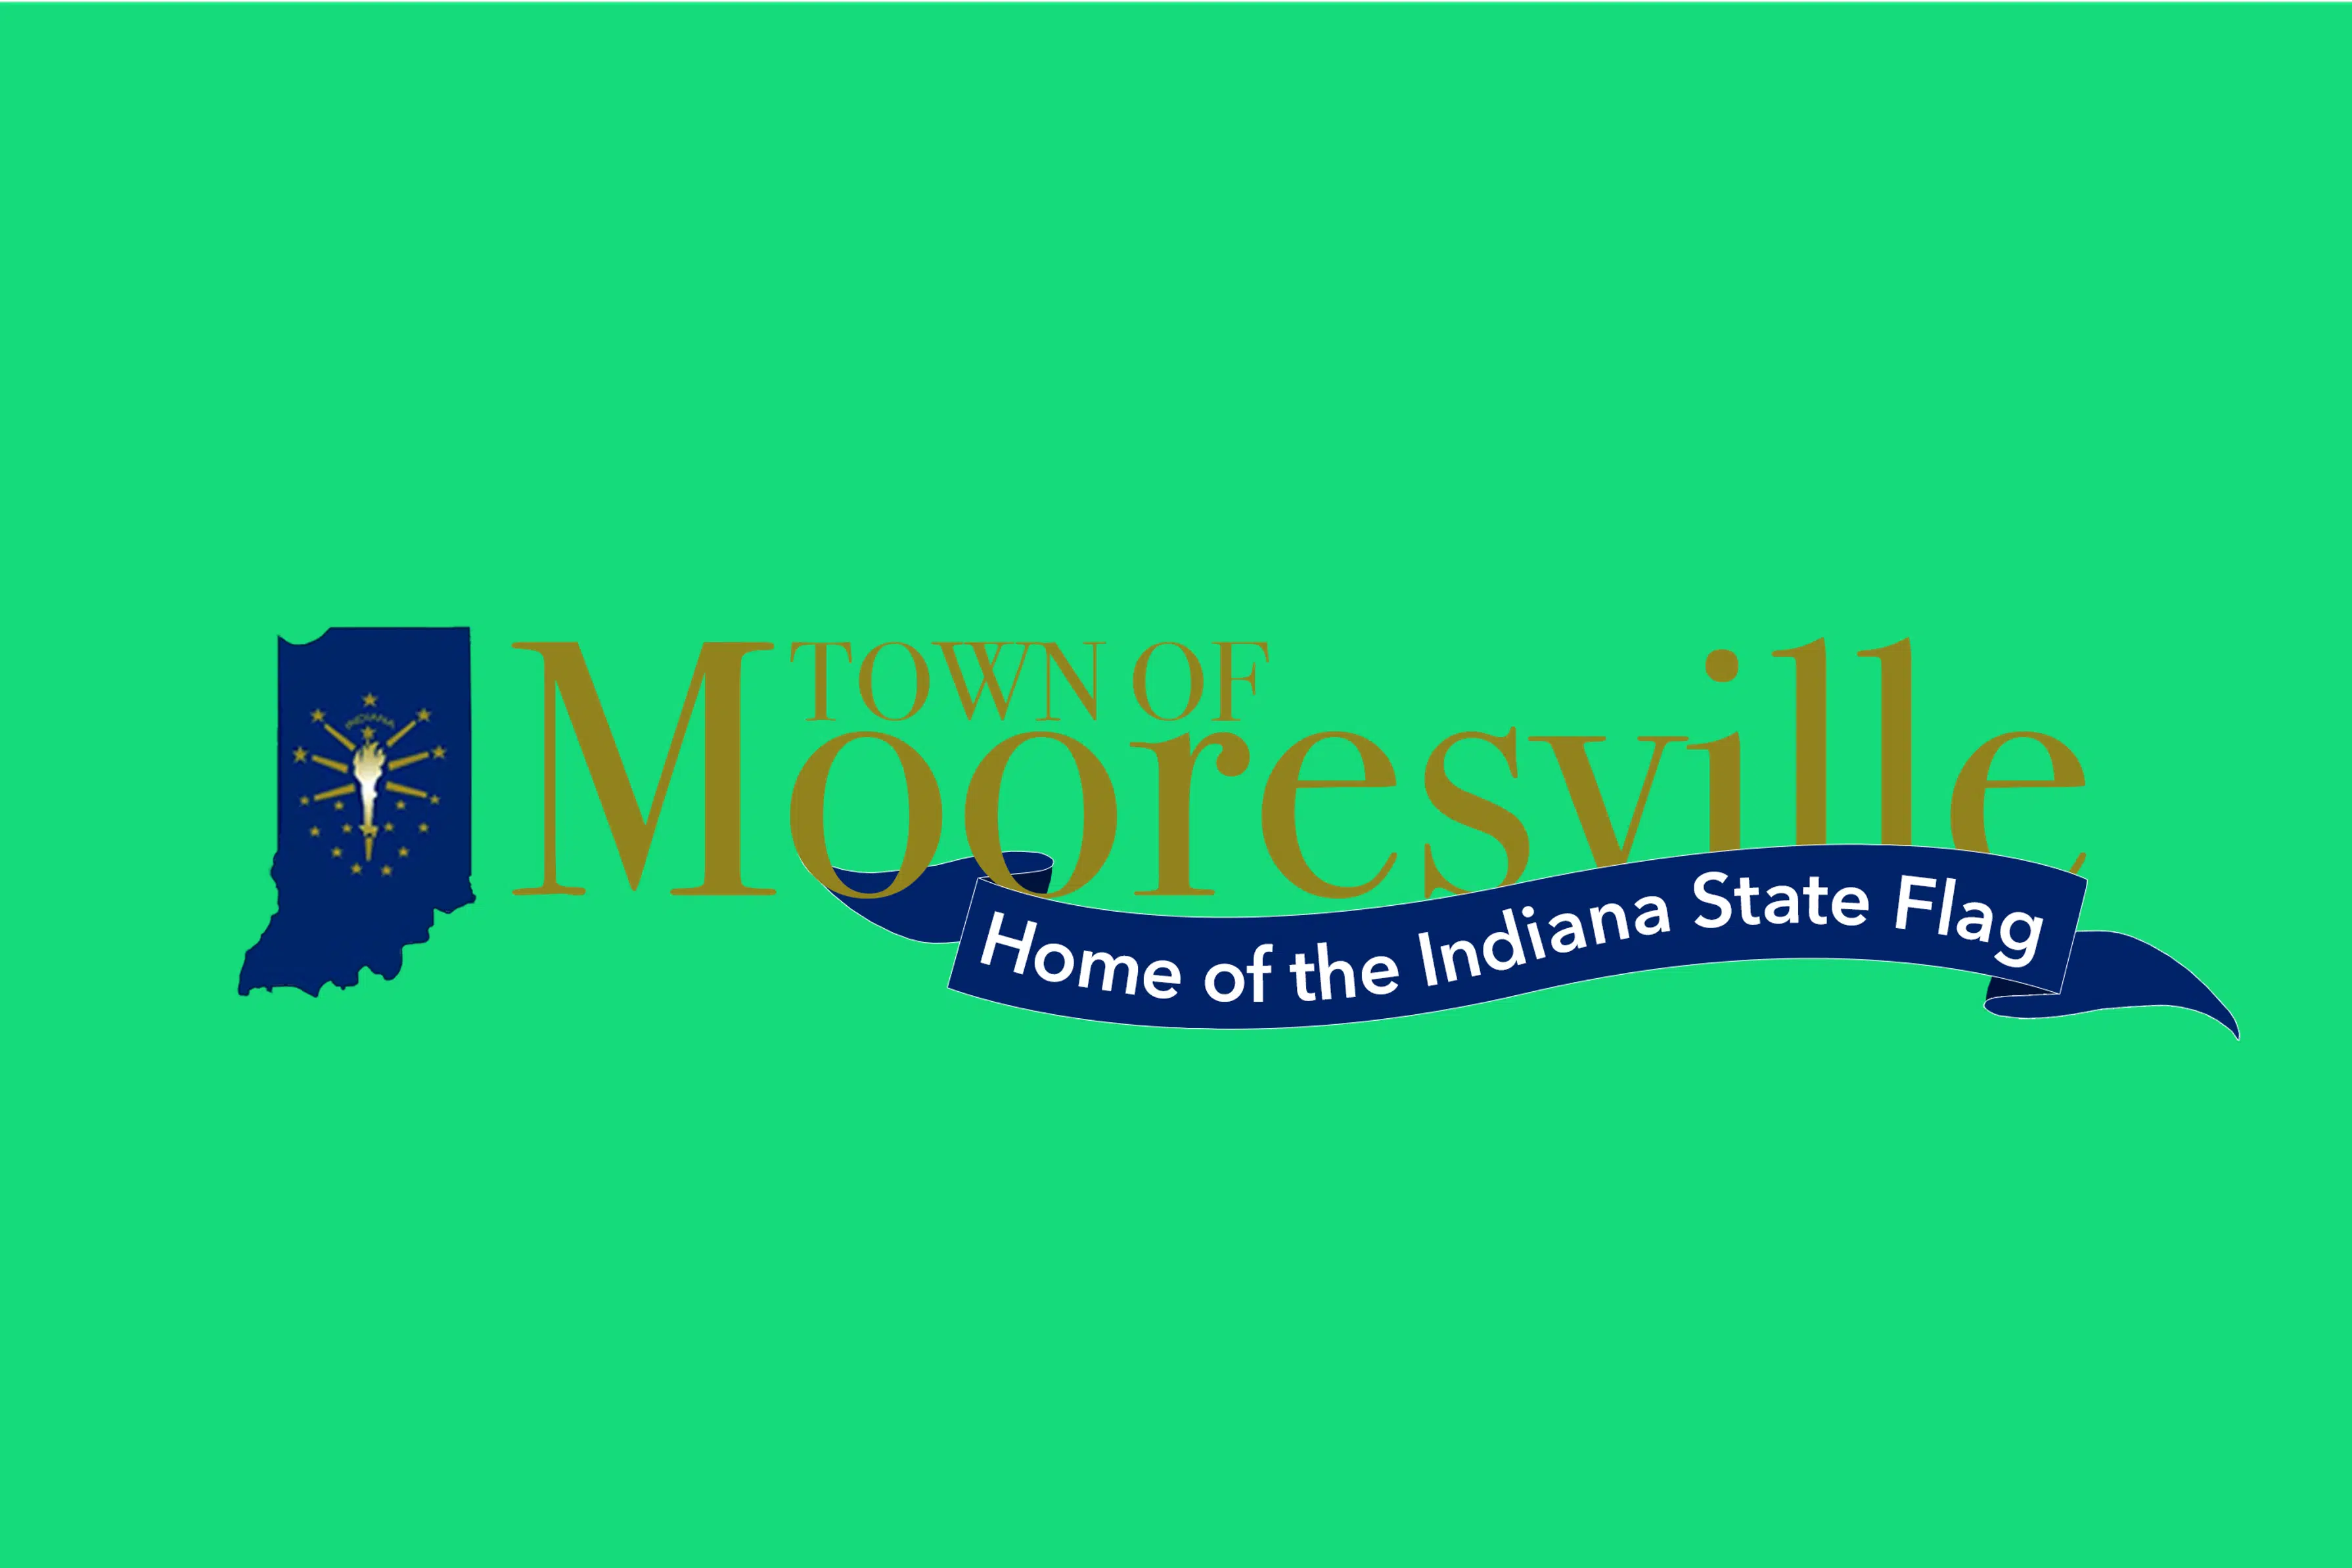 Town of Mooresville